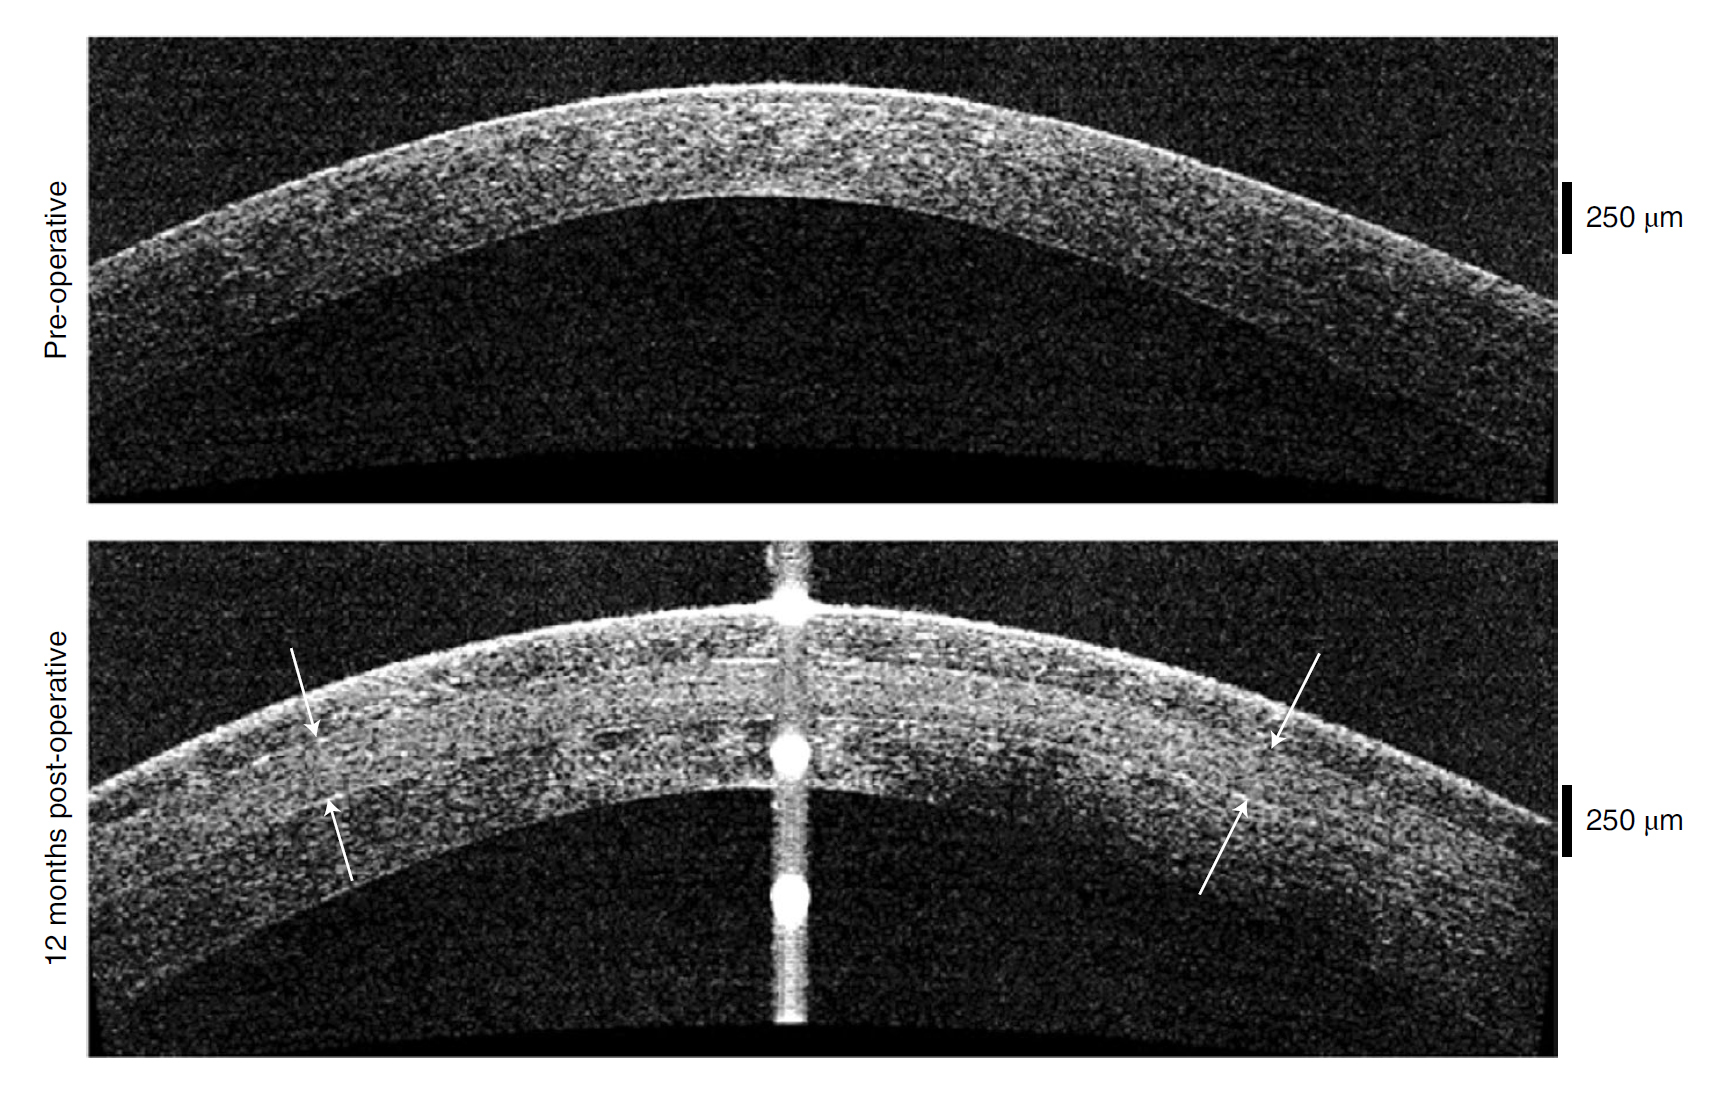 Changes in corneal thickness with arrows contouring the implant after surgery.